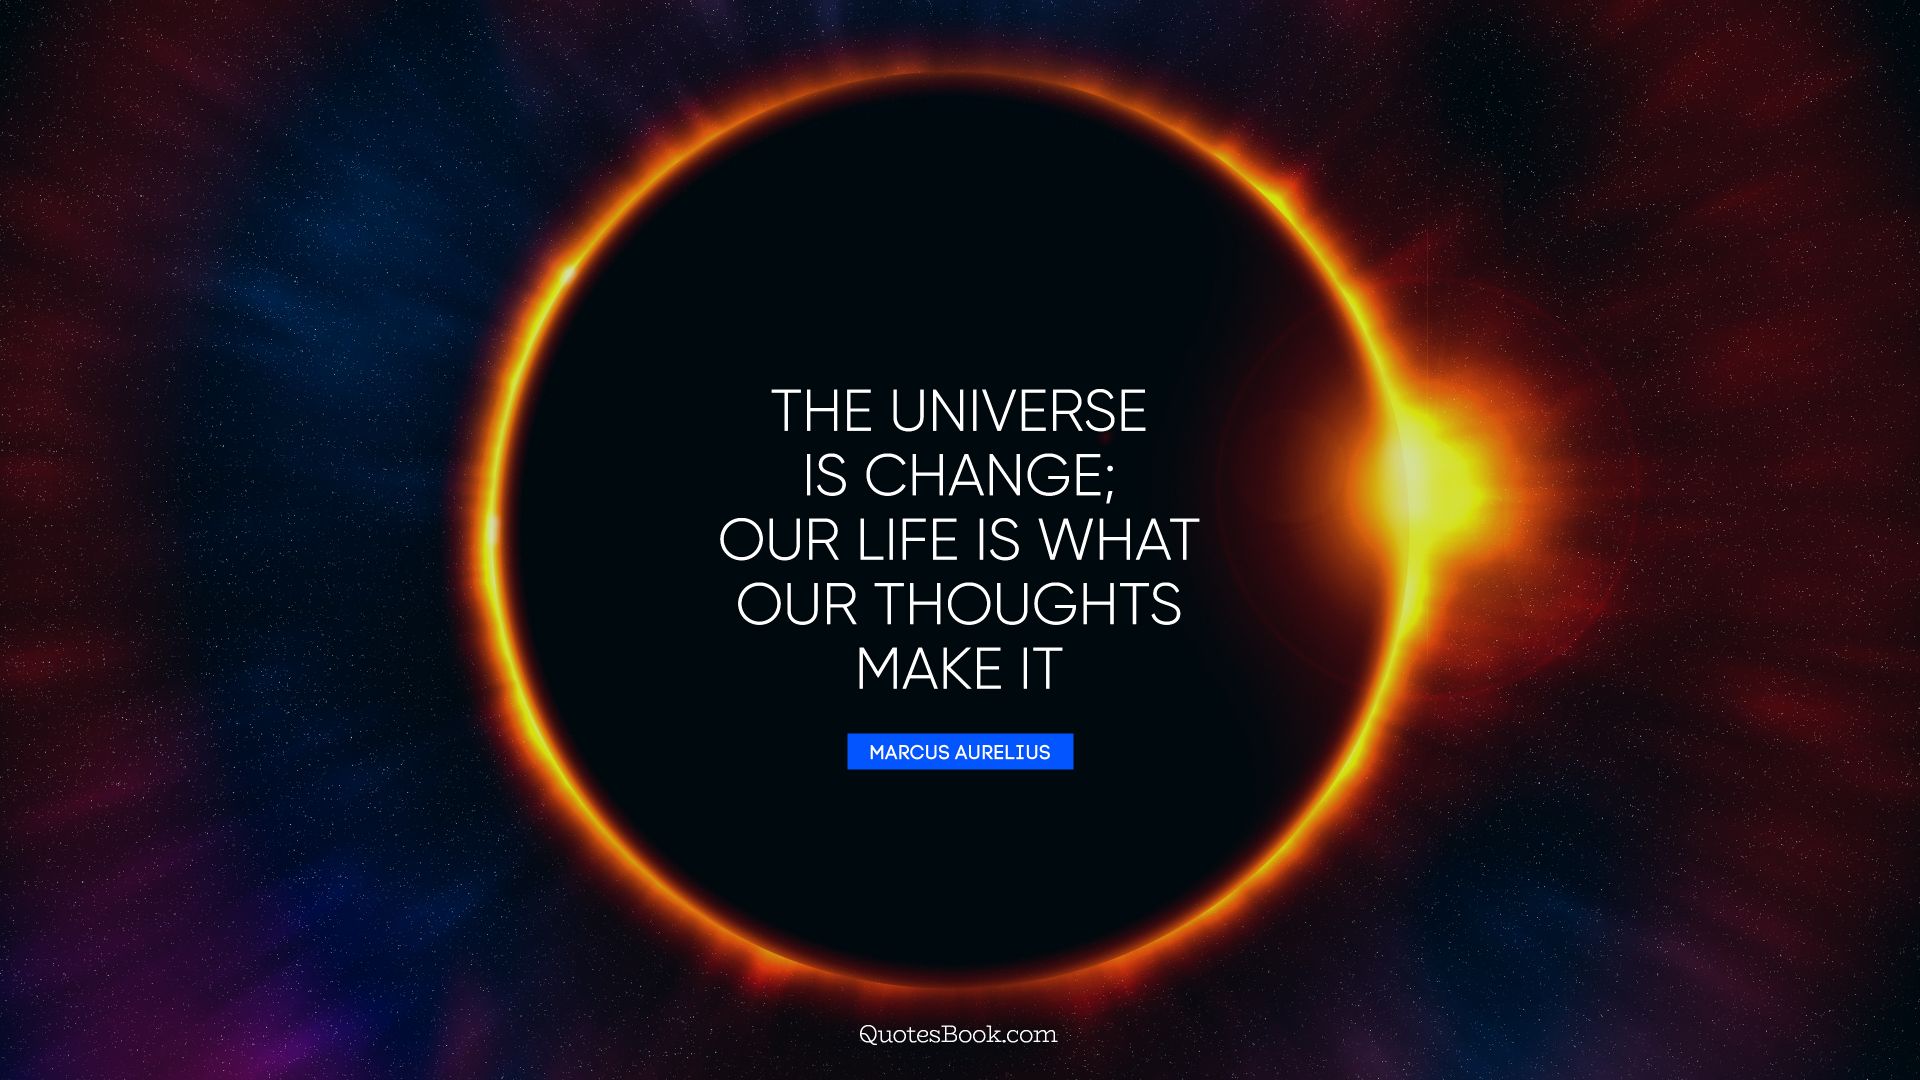 The universe is change; our life is what our thoughts make it. - Quote by Marcus Aurelius